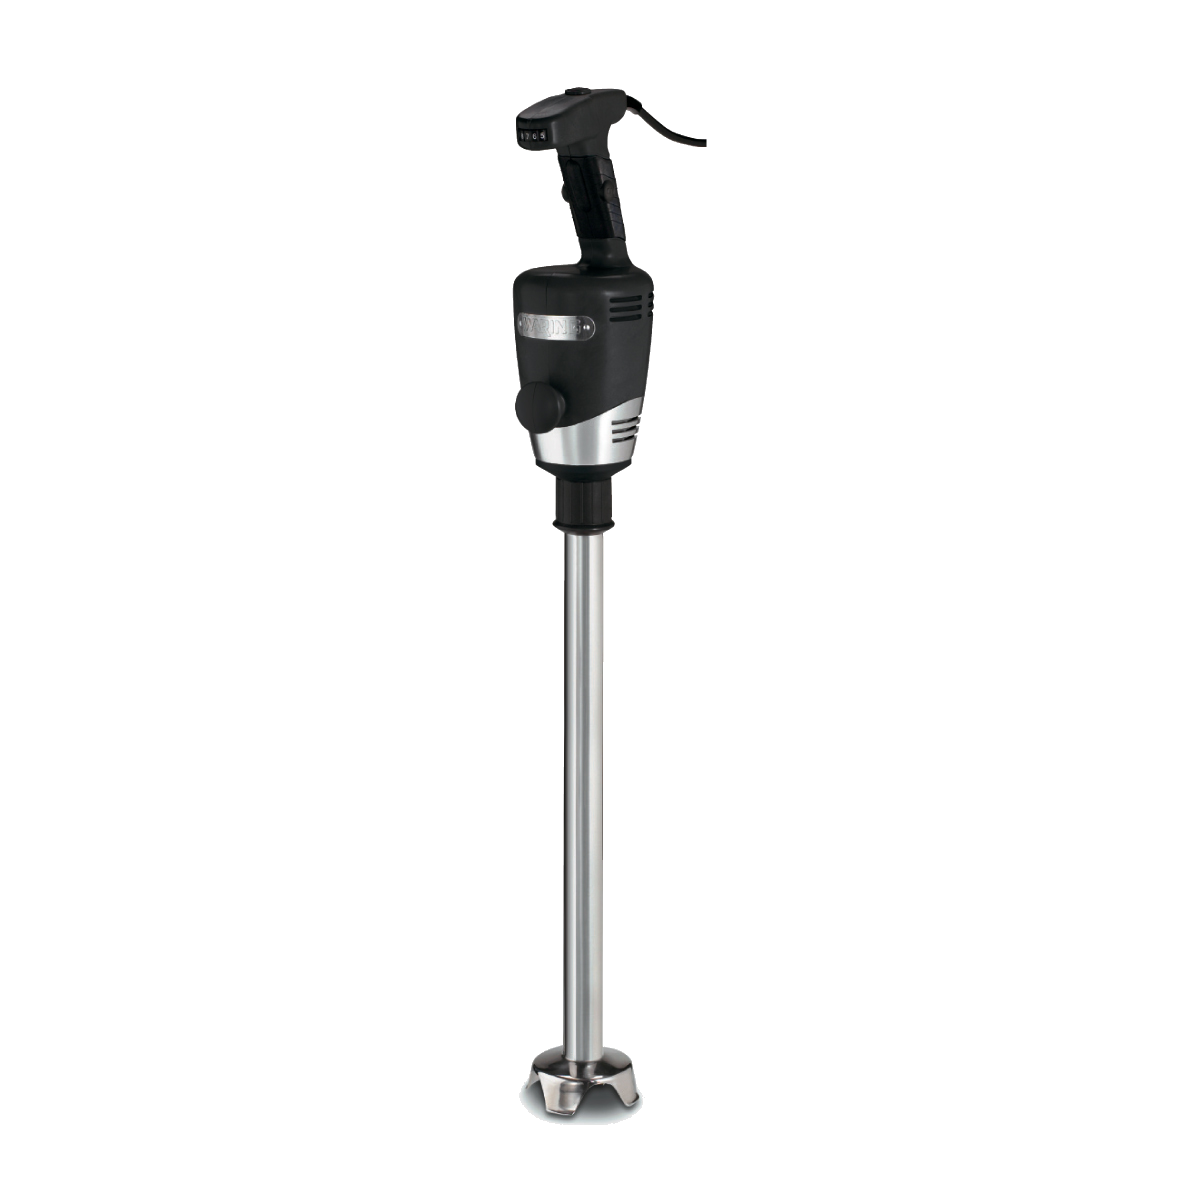 Waring WSB70 21 Inch Immersion Blender - By Celebrate Festival Inc